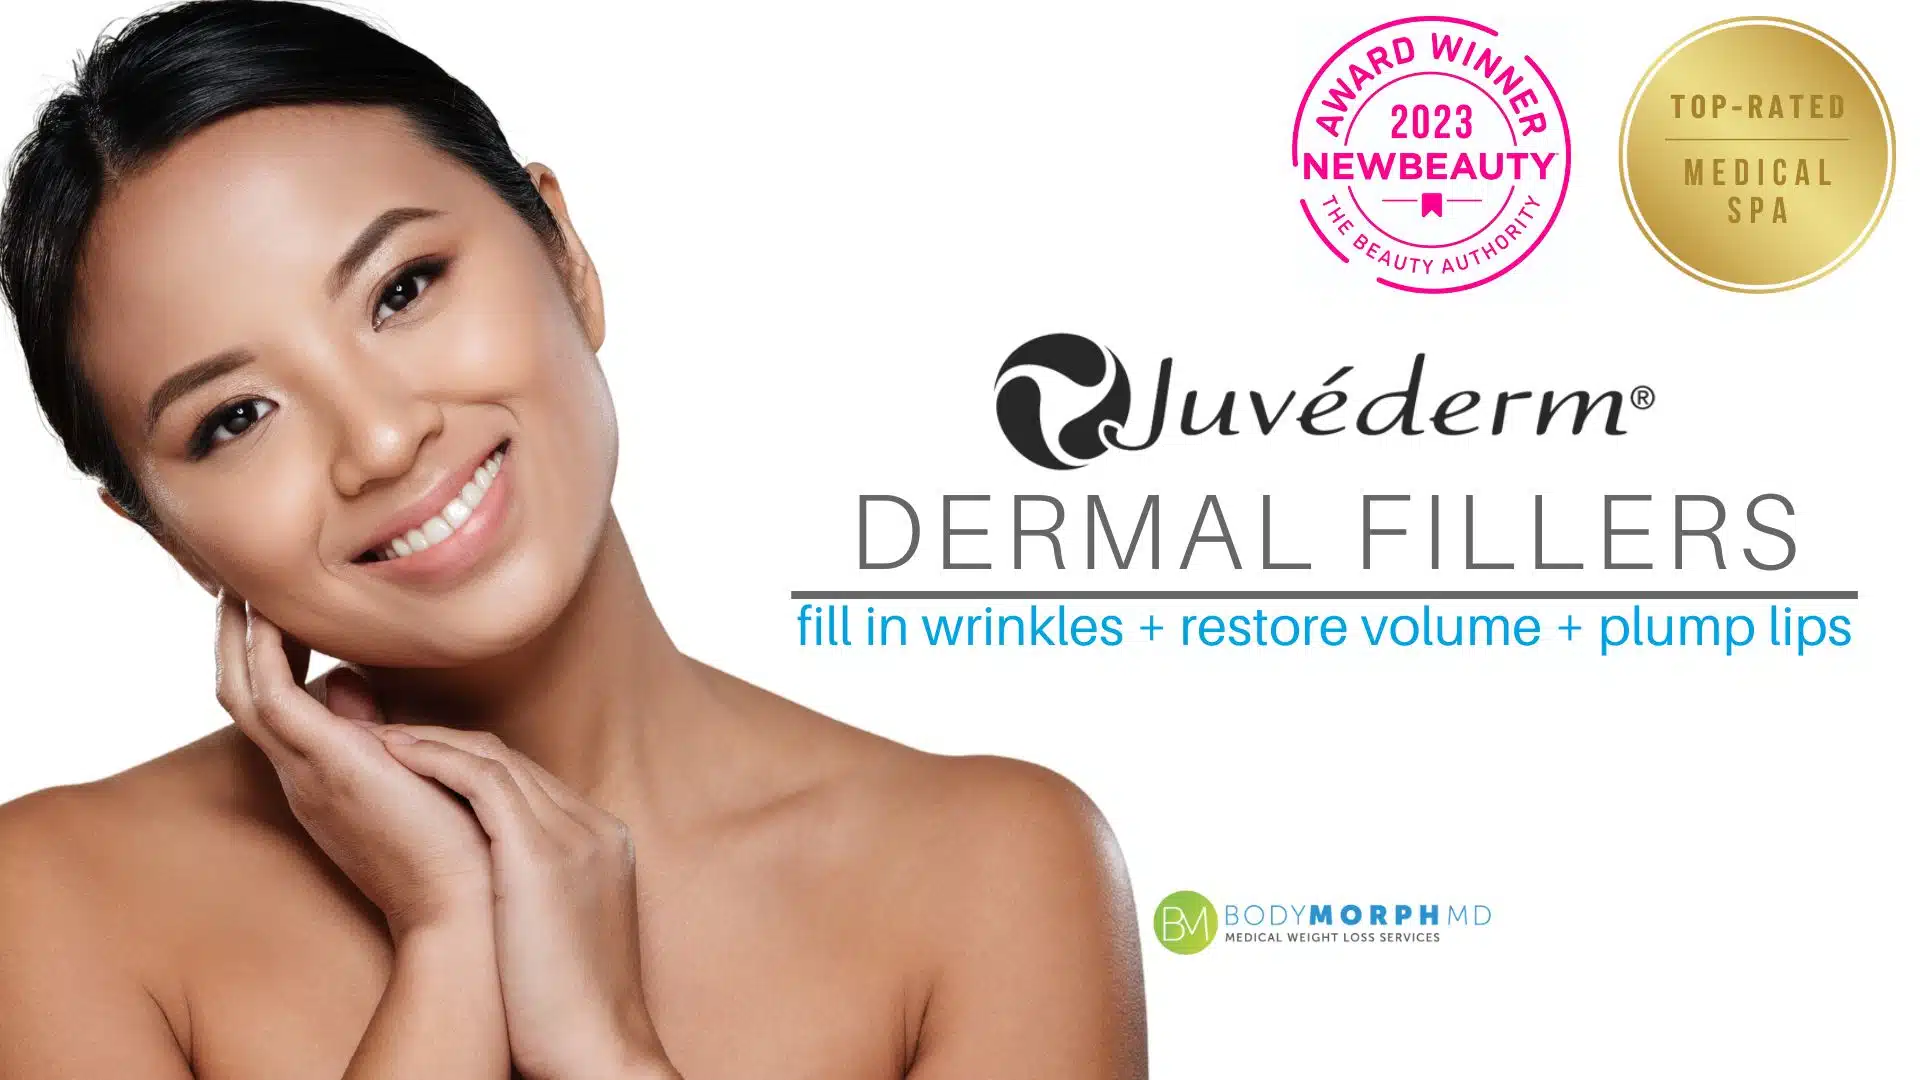 A charming woman with a younger face is promoting dermal fillers in Naples, FL.